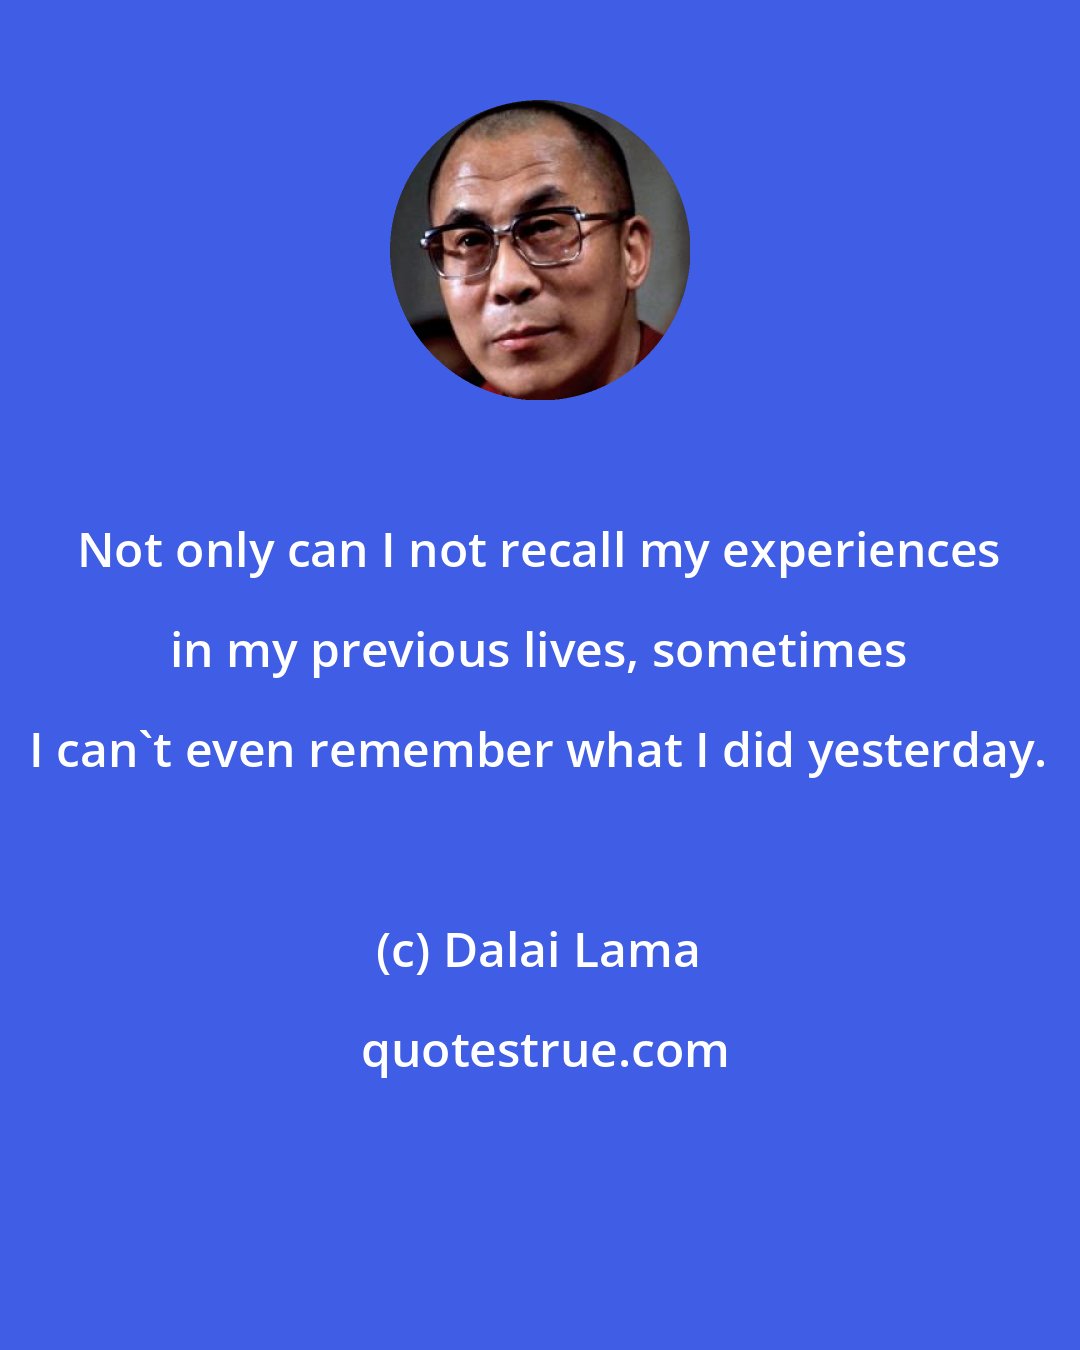 Dalai Lama: Not only can I not recall my experiences in my previous lives, sometimes I can't even remember what I did yesterday.